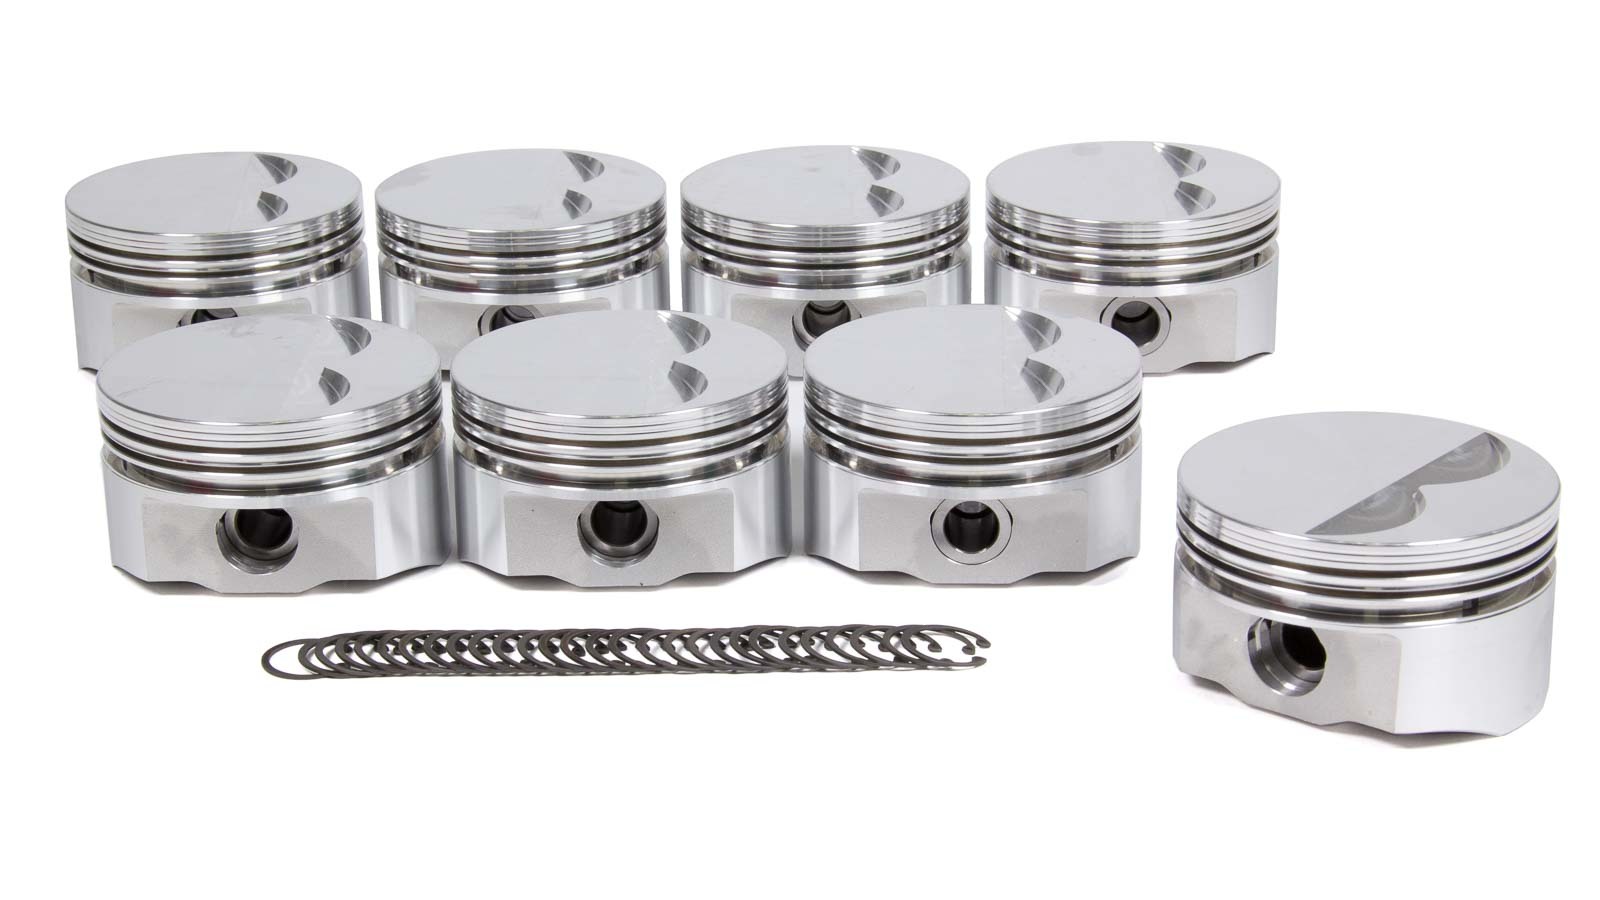 DSS Racing 8720-4030 Piston, E Series, Forged, 4.030 in Bore, 5/64 x 5/64 x 3/16 in Ring Grooves, Minus 3.00 cc, Small Block Ford, Set of 8